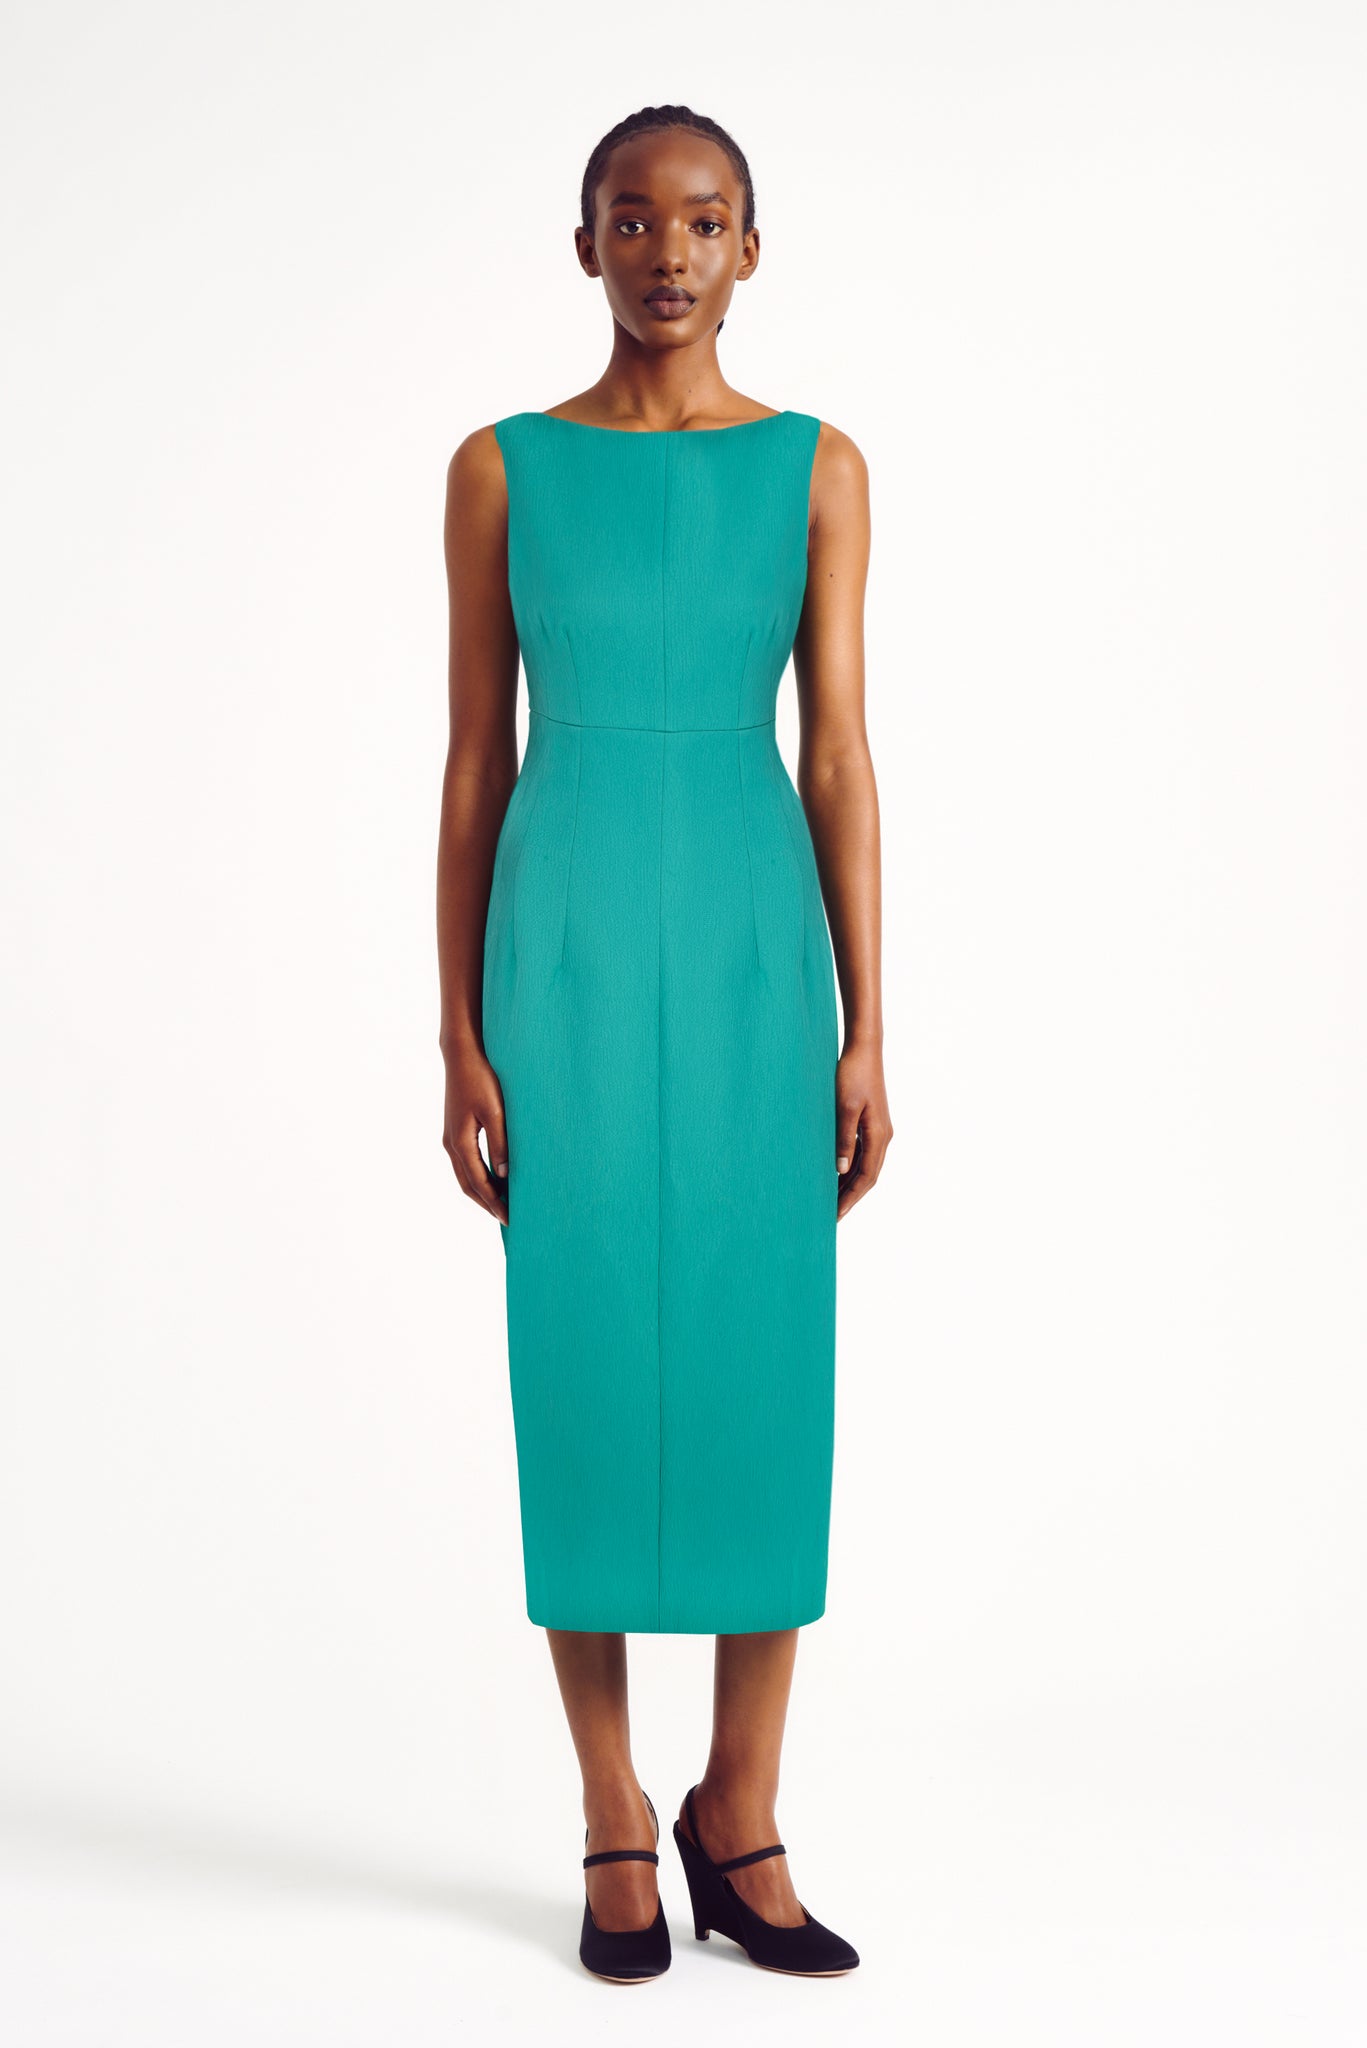 Ashie Dress in Turquoise Textured Cloque